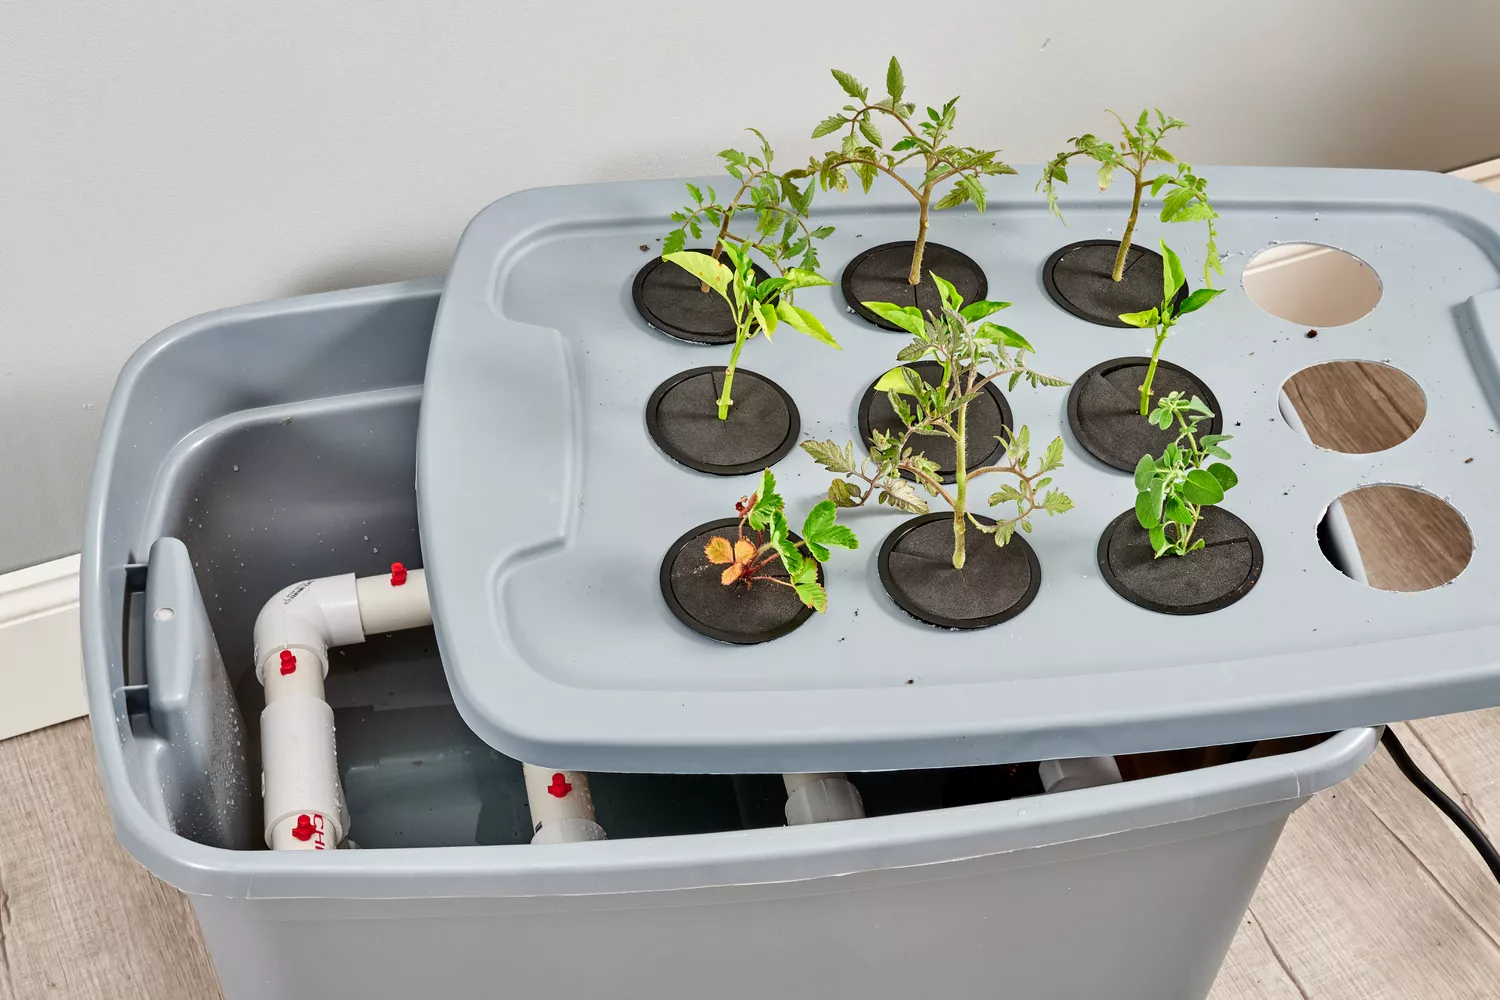 How To Make A Hydroponic Garden